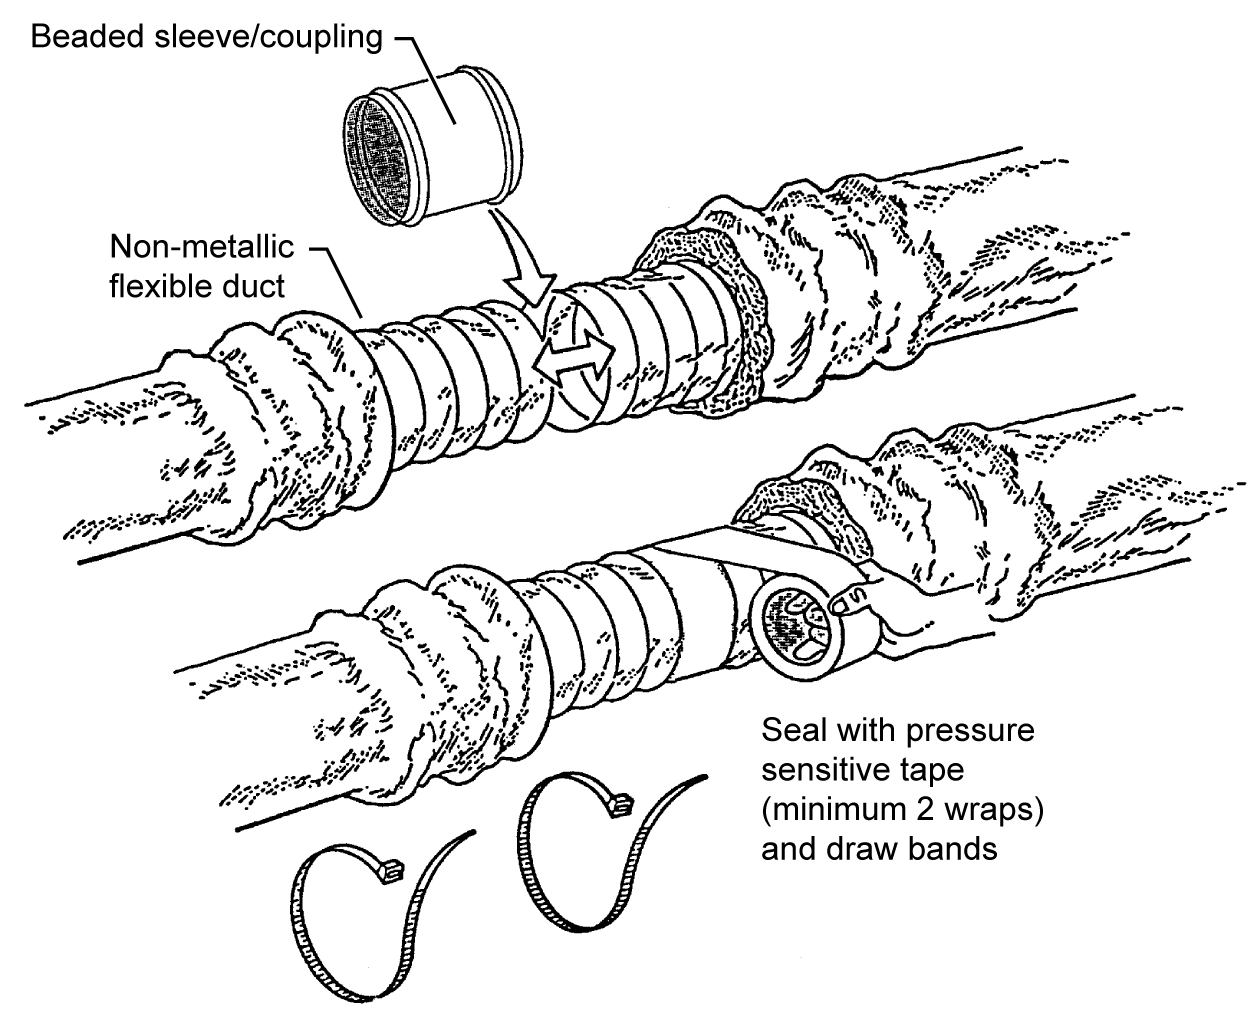 Figure showing connecting flex ducts using tape and clamps